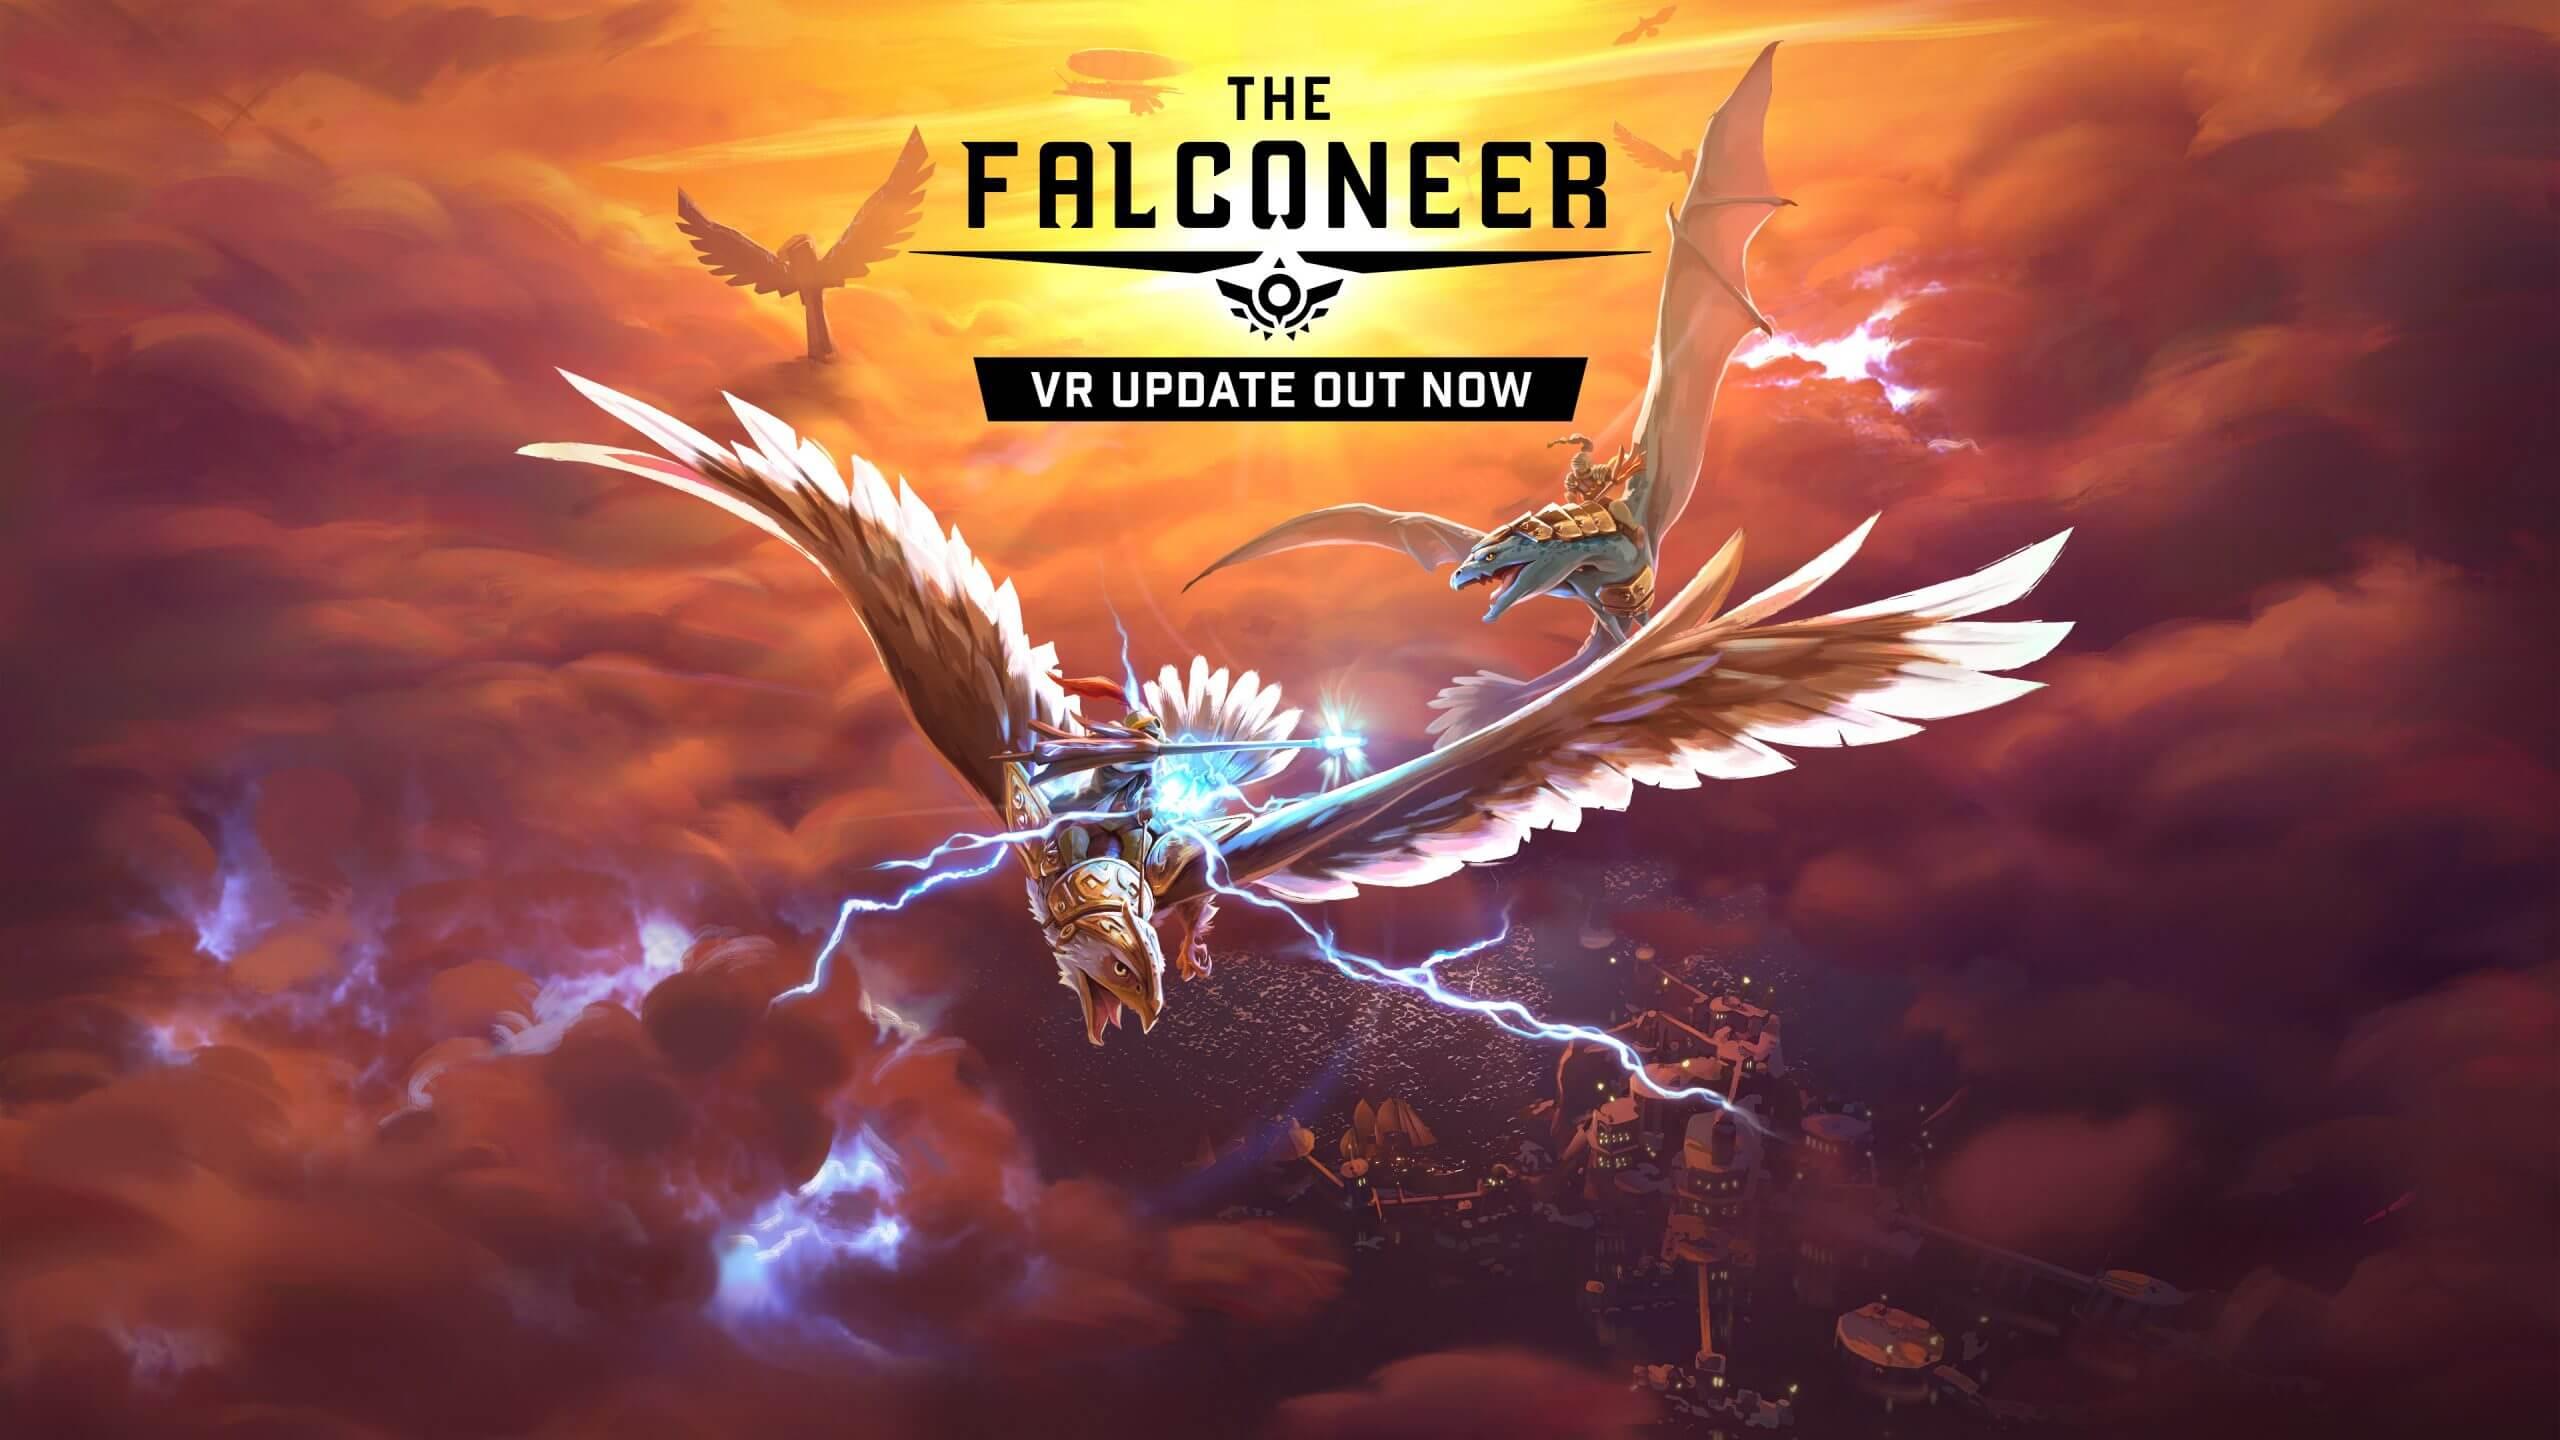 The Falconeer VR